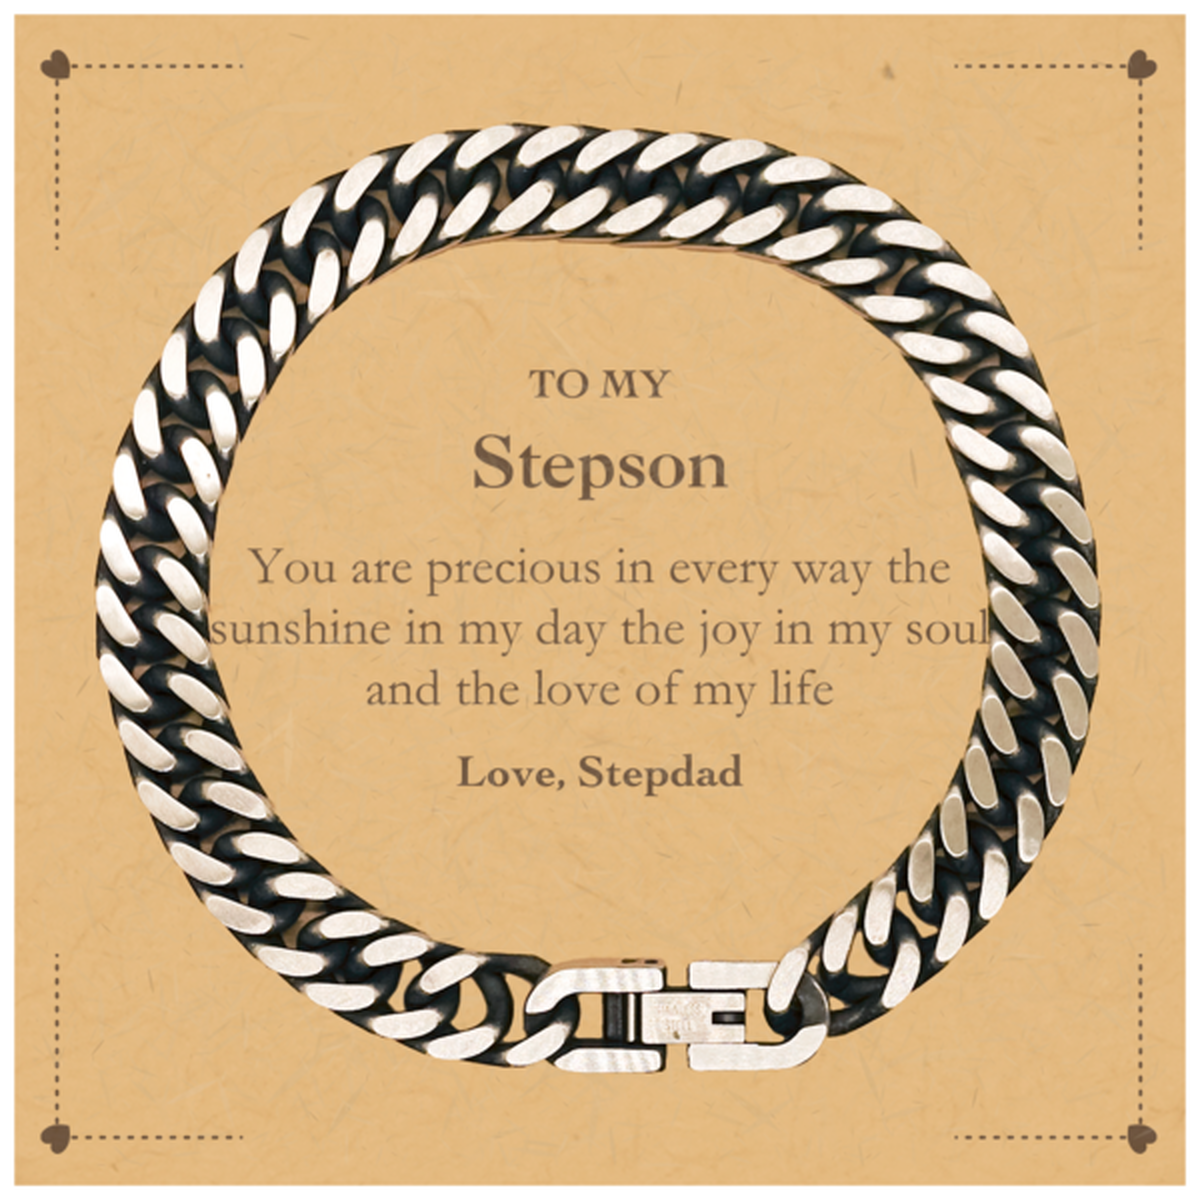 Graduation Gifts for Stepson Cuban Link Chain Bracelet Present from Stepdad, Christmas Stepson Birthday Gifts Stepson You are precious in every way the sunshine in my day. Love, Stepdad